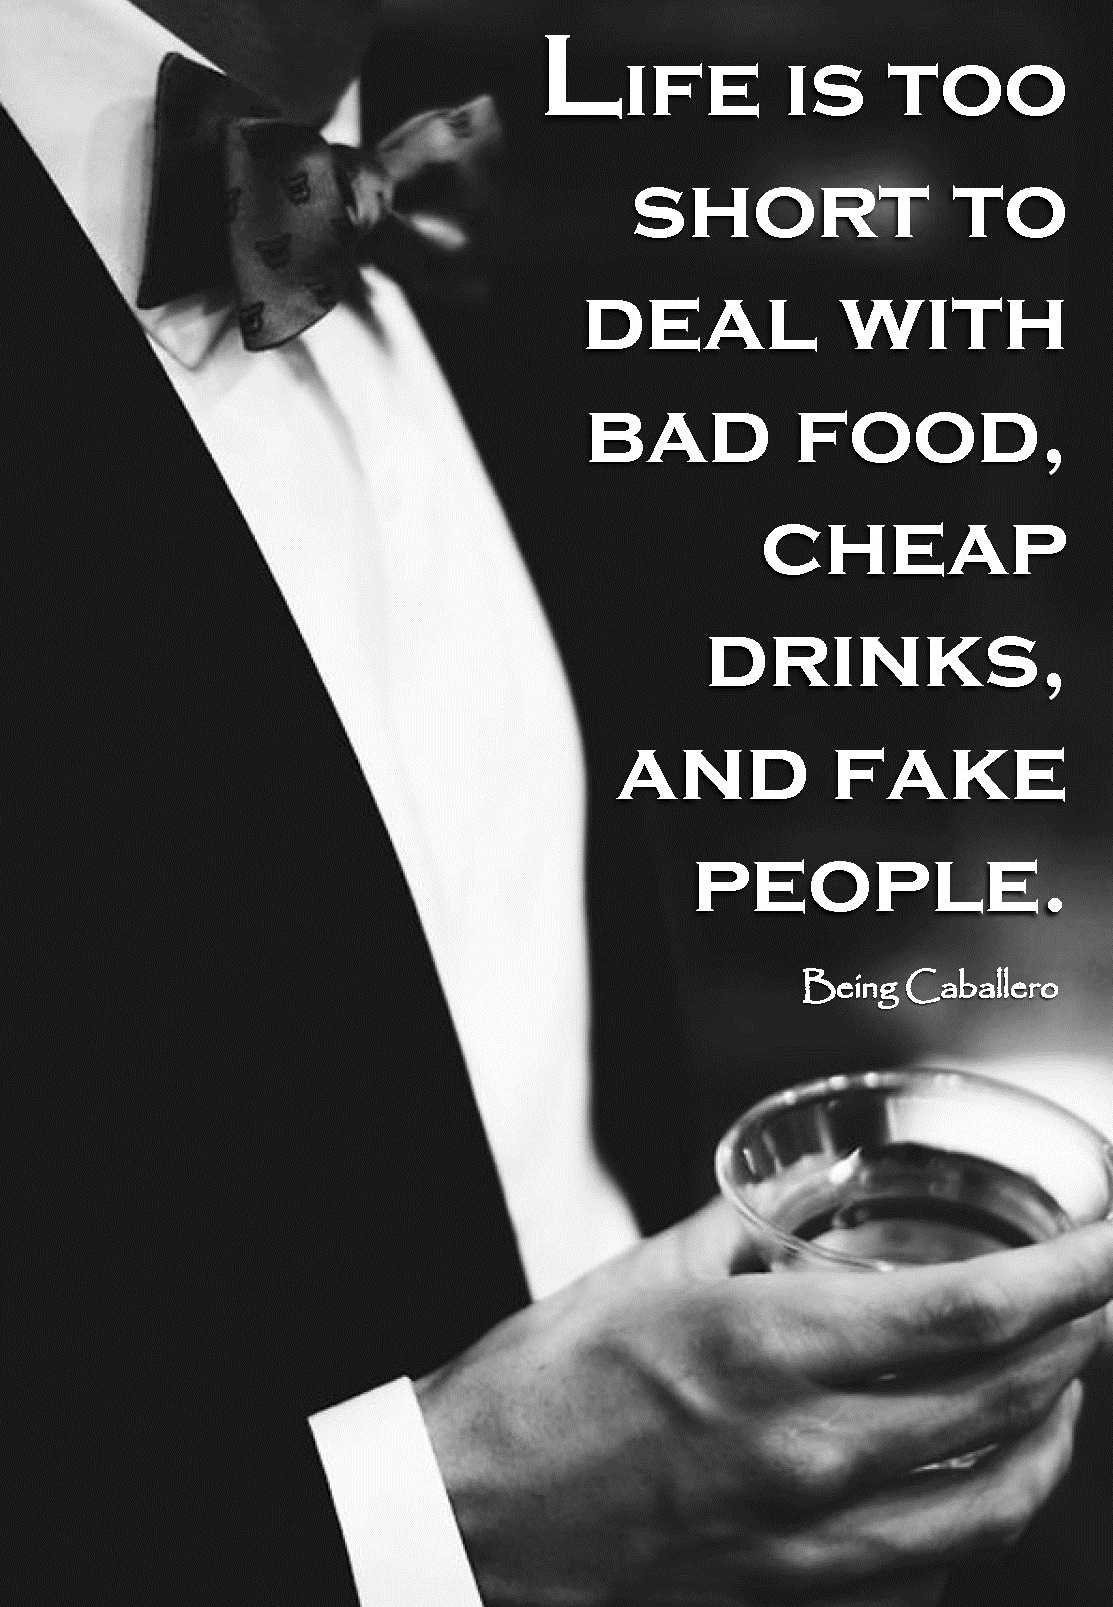 Dealing With Bad People Quotes. QuotesGram